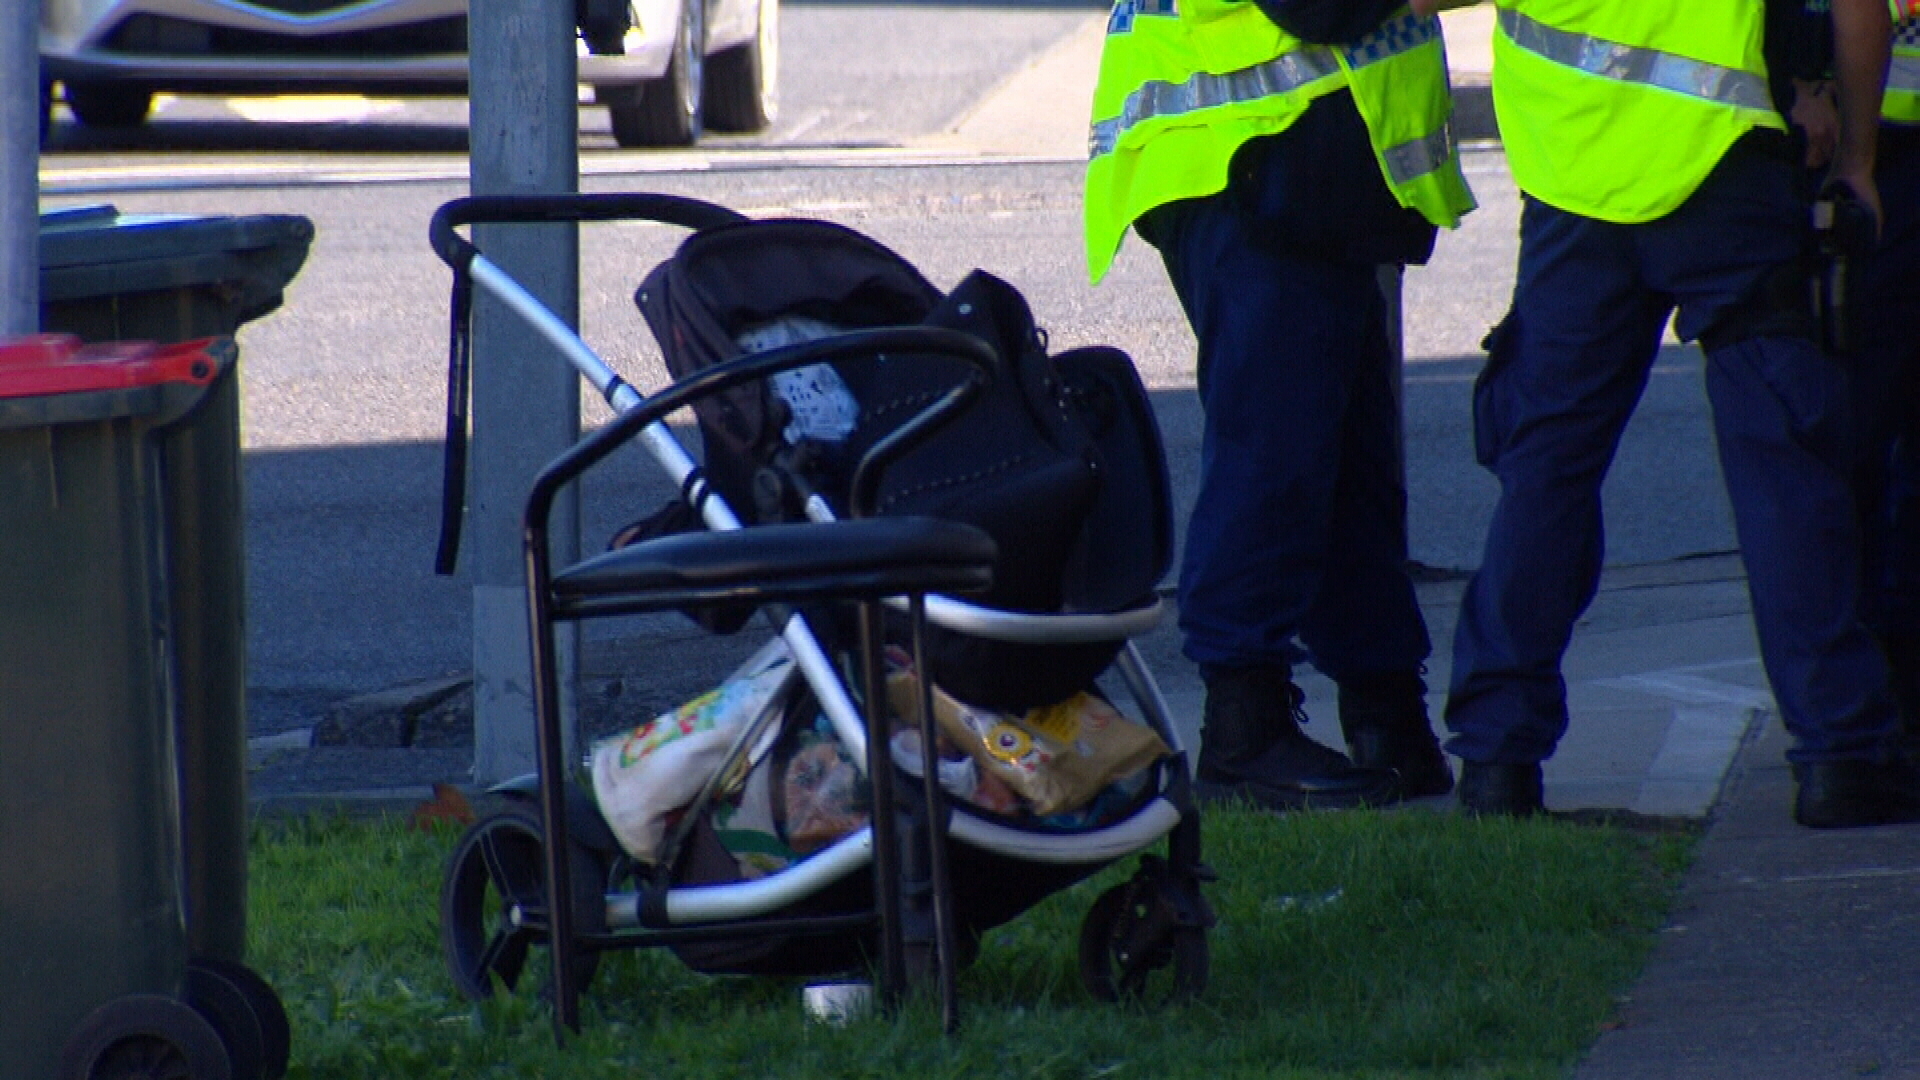 A mum and her baby have been hit while they were walking in Five Dock.